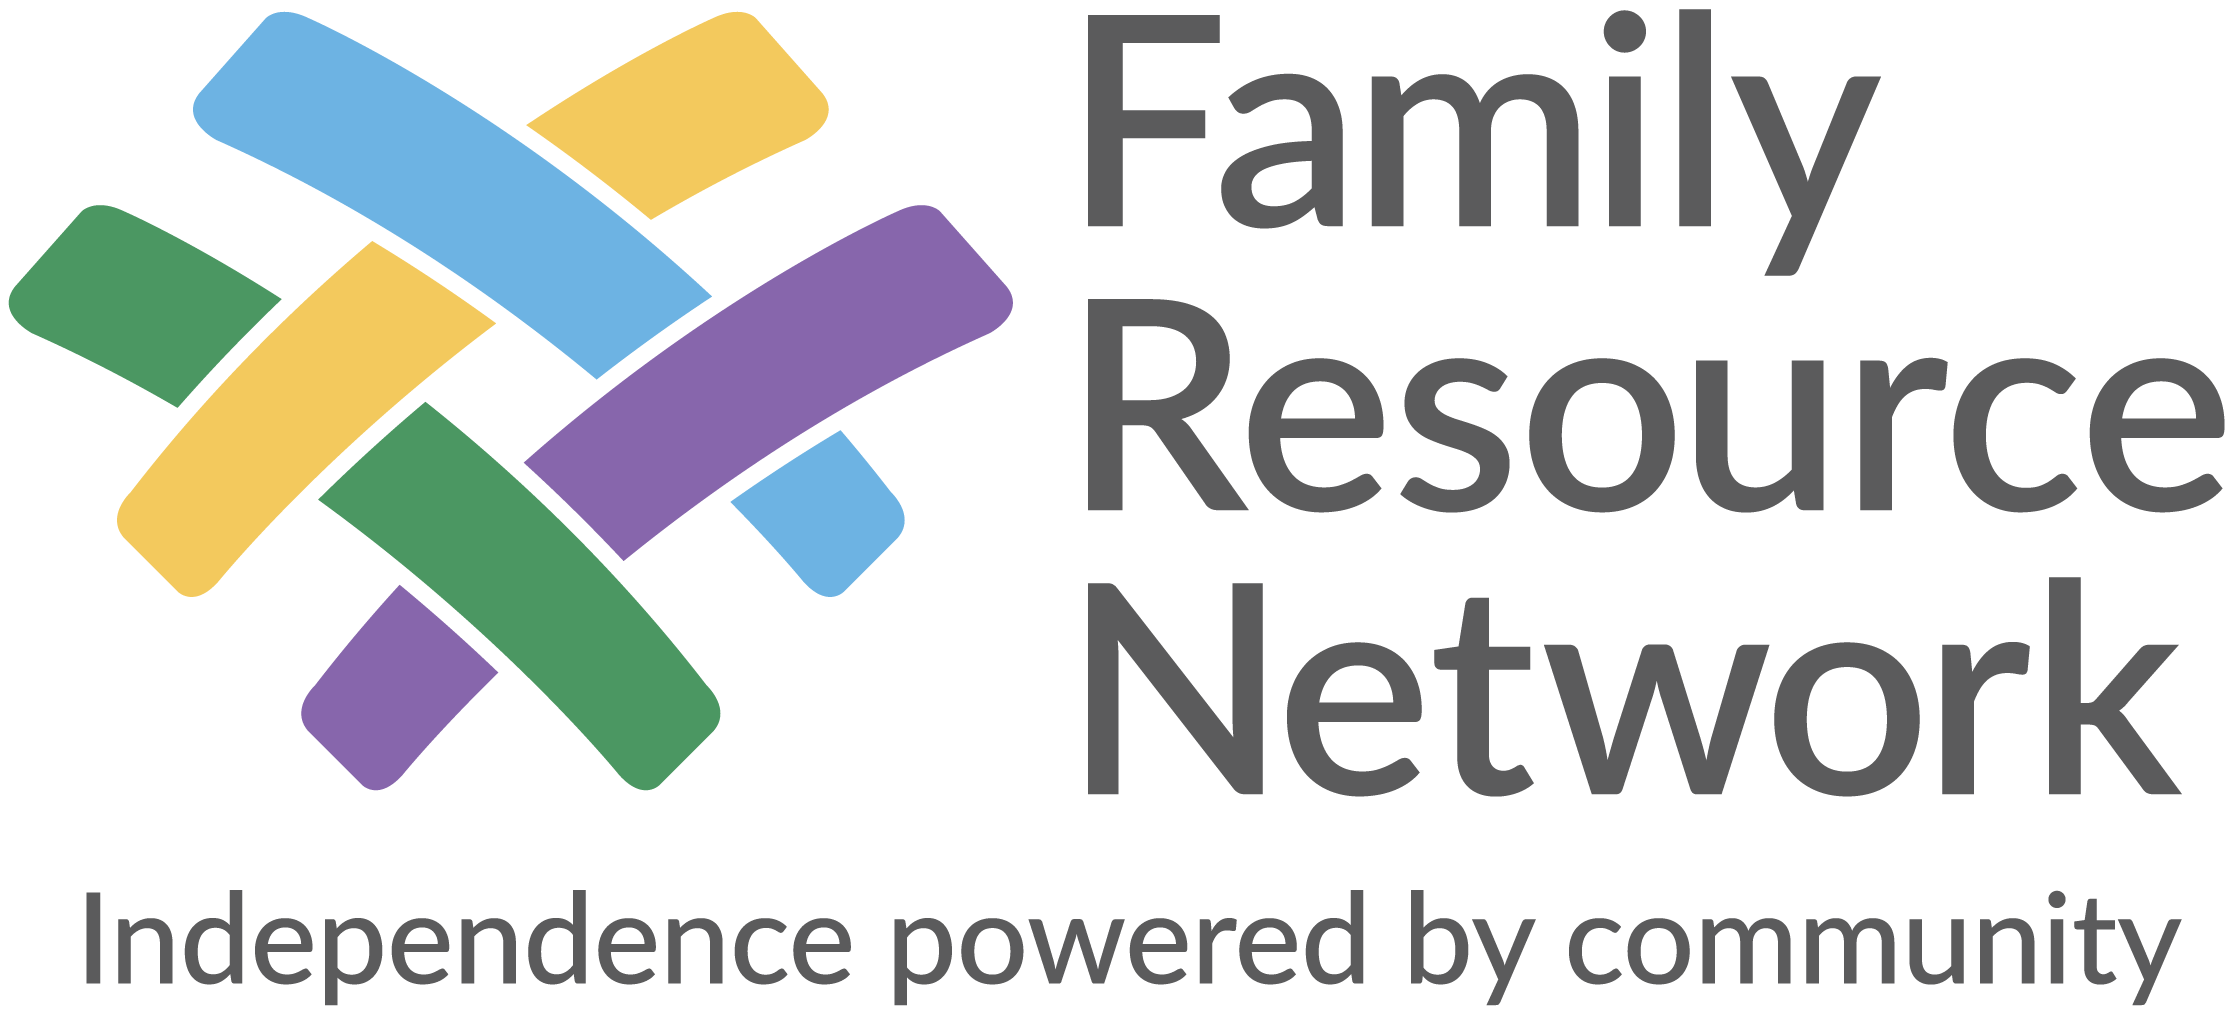 Family Resource Network